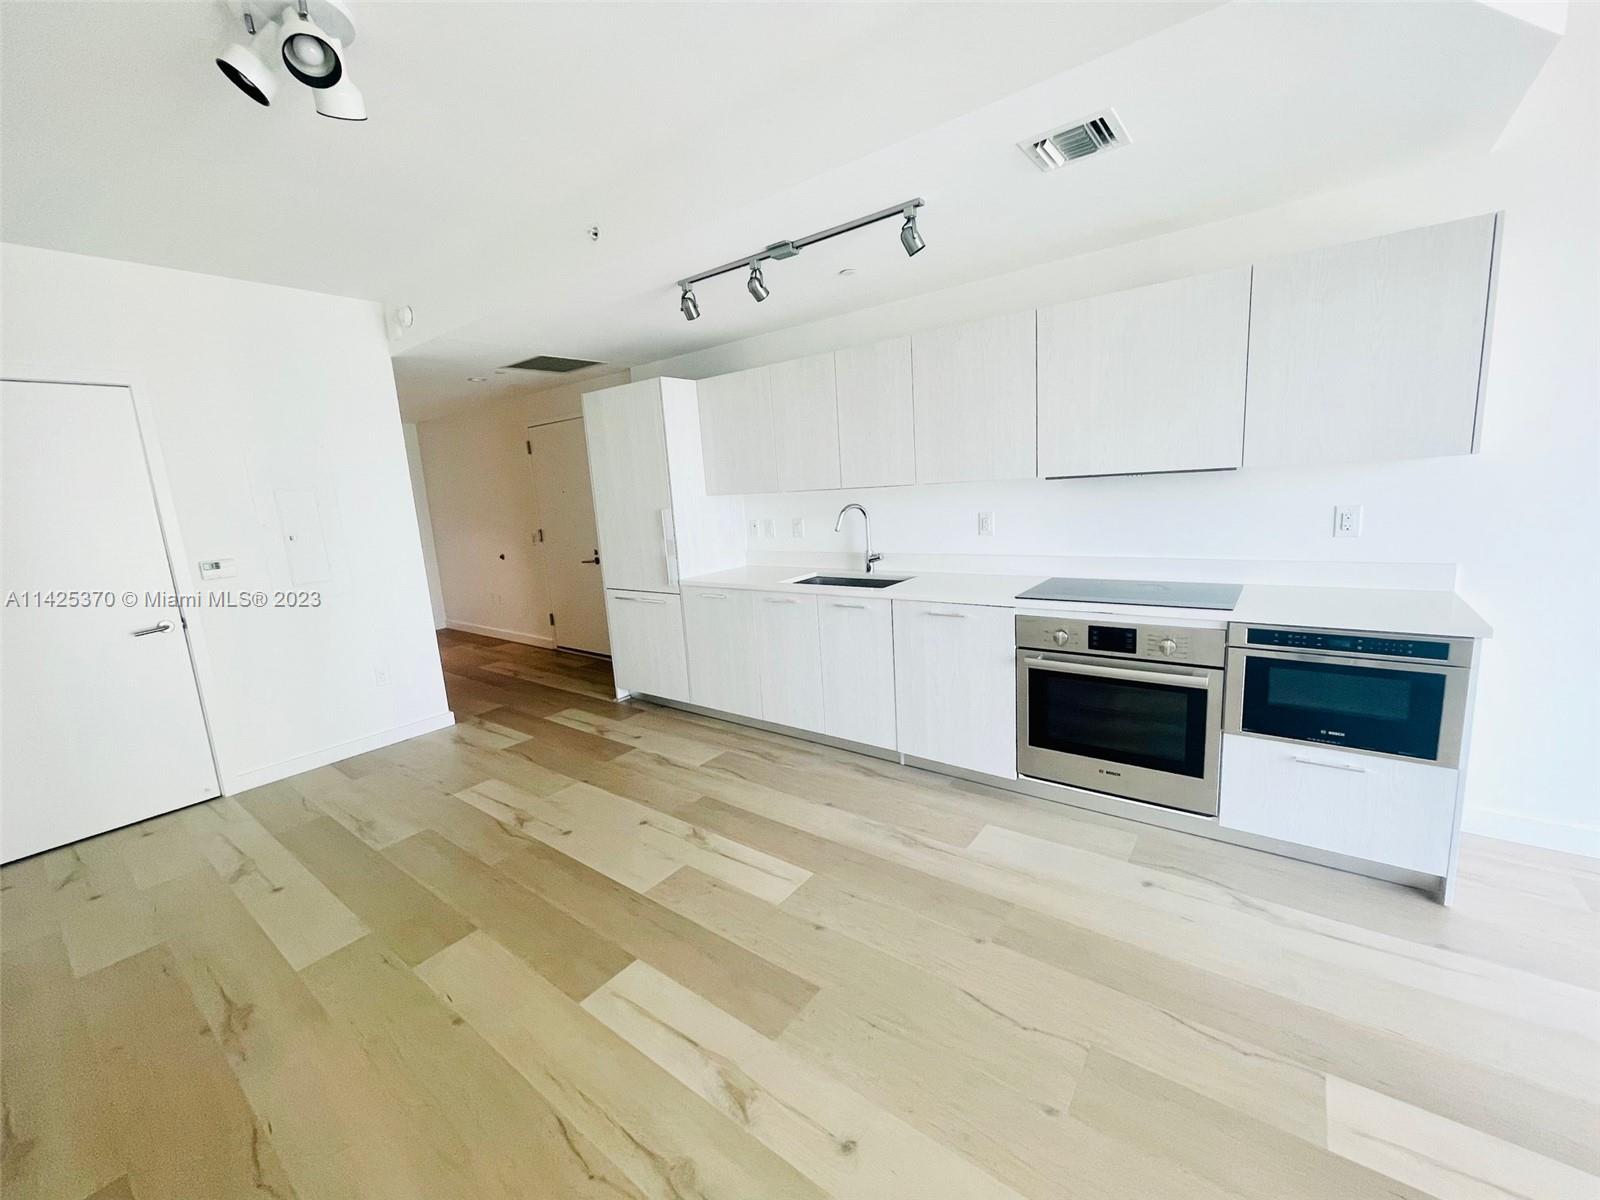 This modern 1 bedroom, 1.5 Bathroom + DEN/ Office apartment is located in the trendiest neighborhood in Miami! Edgewater is just minutes away from Design District one of the most luxurious shopping and lifestyle destinations. Unit has brand new floors throughout. 
In addition to having exclusive amenities, its located in Paraiso district with restaurants, cafes and bay front neighborhood park. Unit features spectacular Bay & Miami Skyline views. Tenant occupied, only serious buyers please.